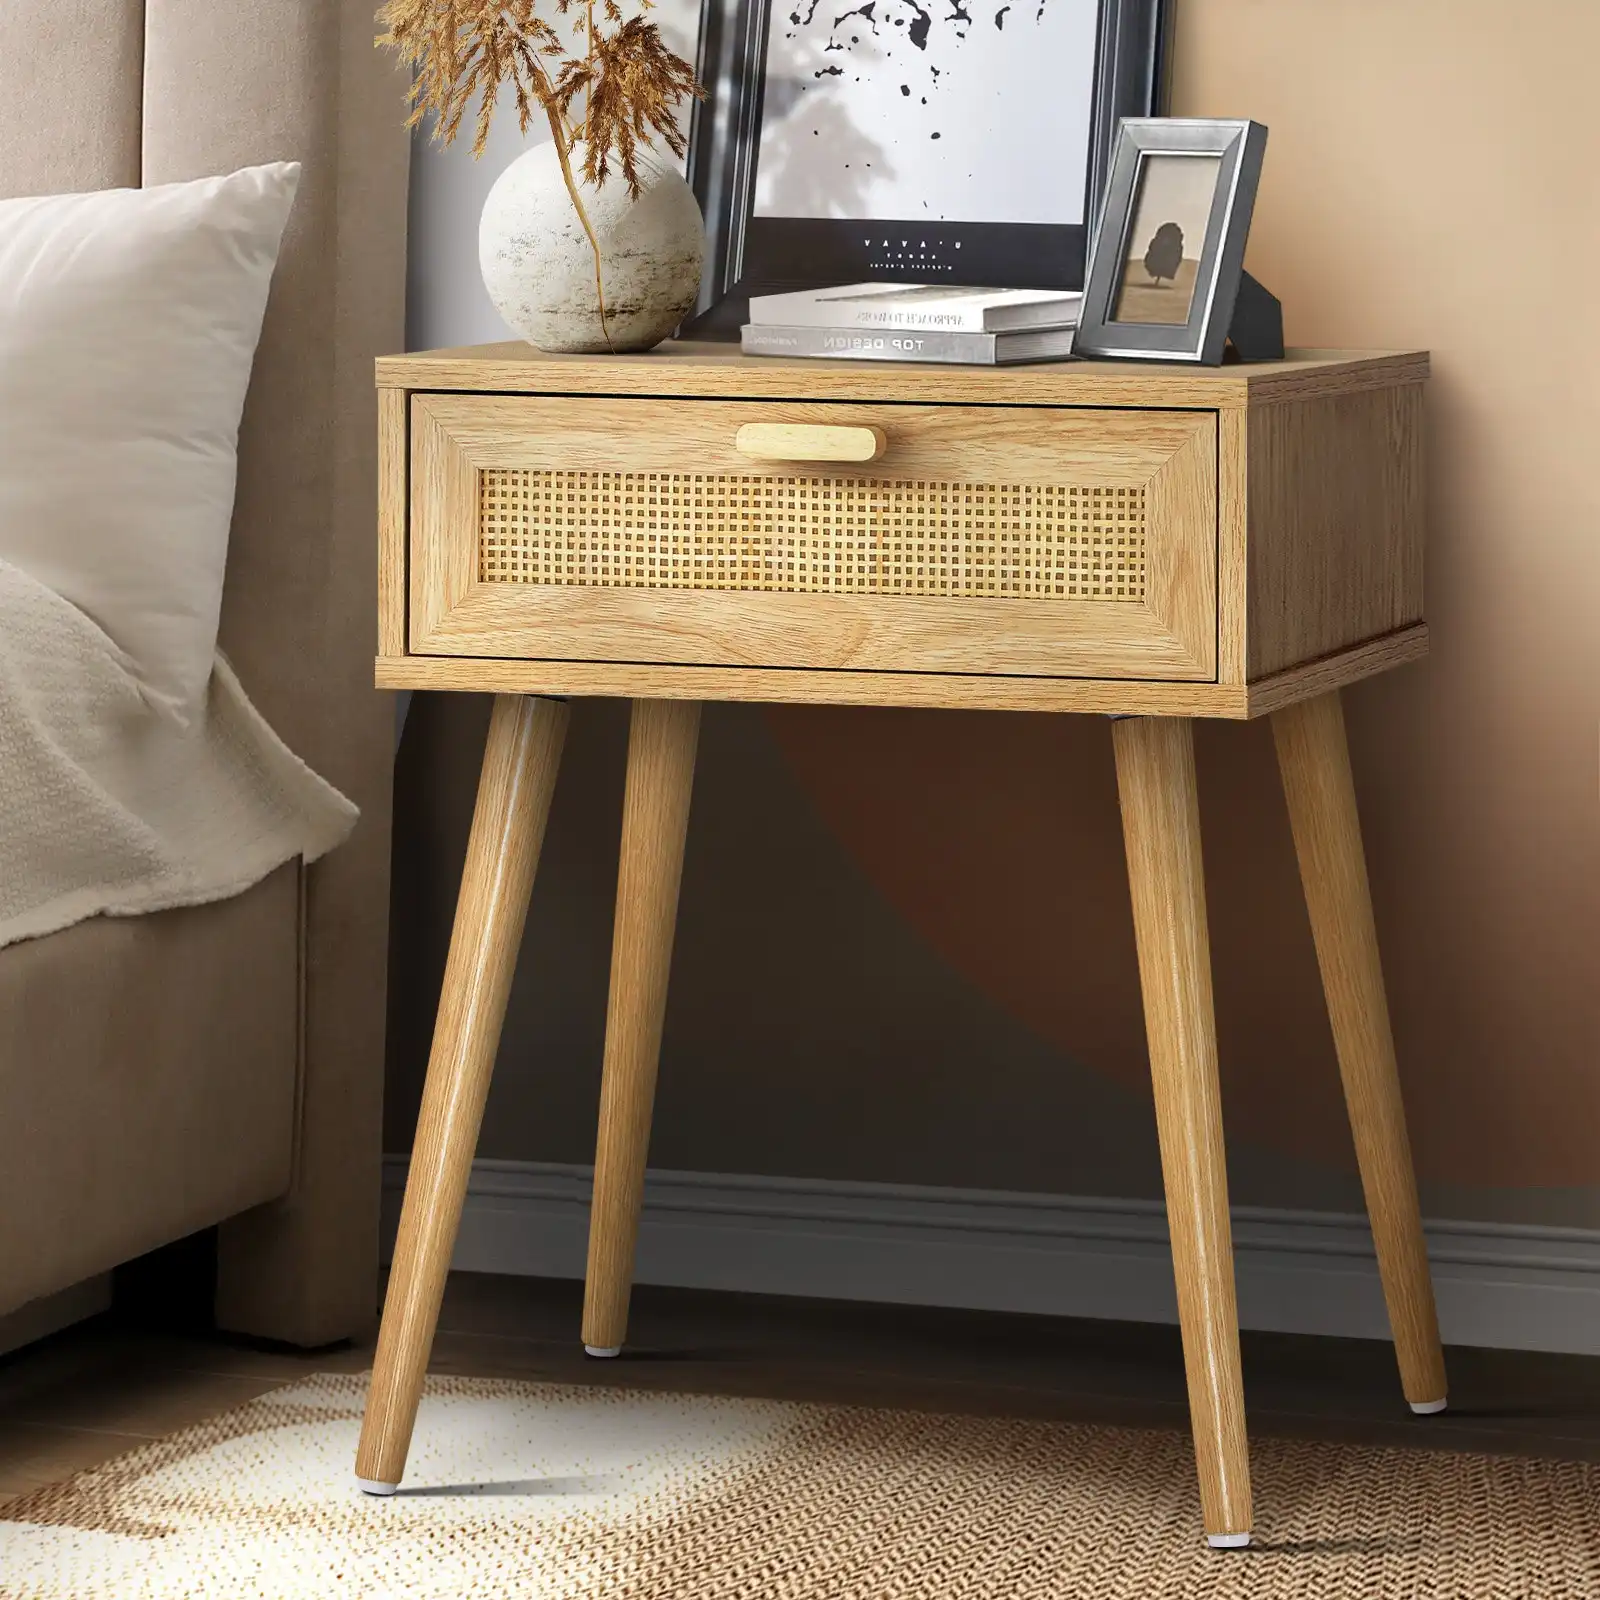 Oikiture Bedside Table Drawer Storage Cabinet Nightstand Rattan Furniture Wood